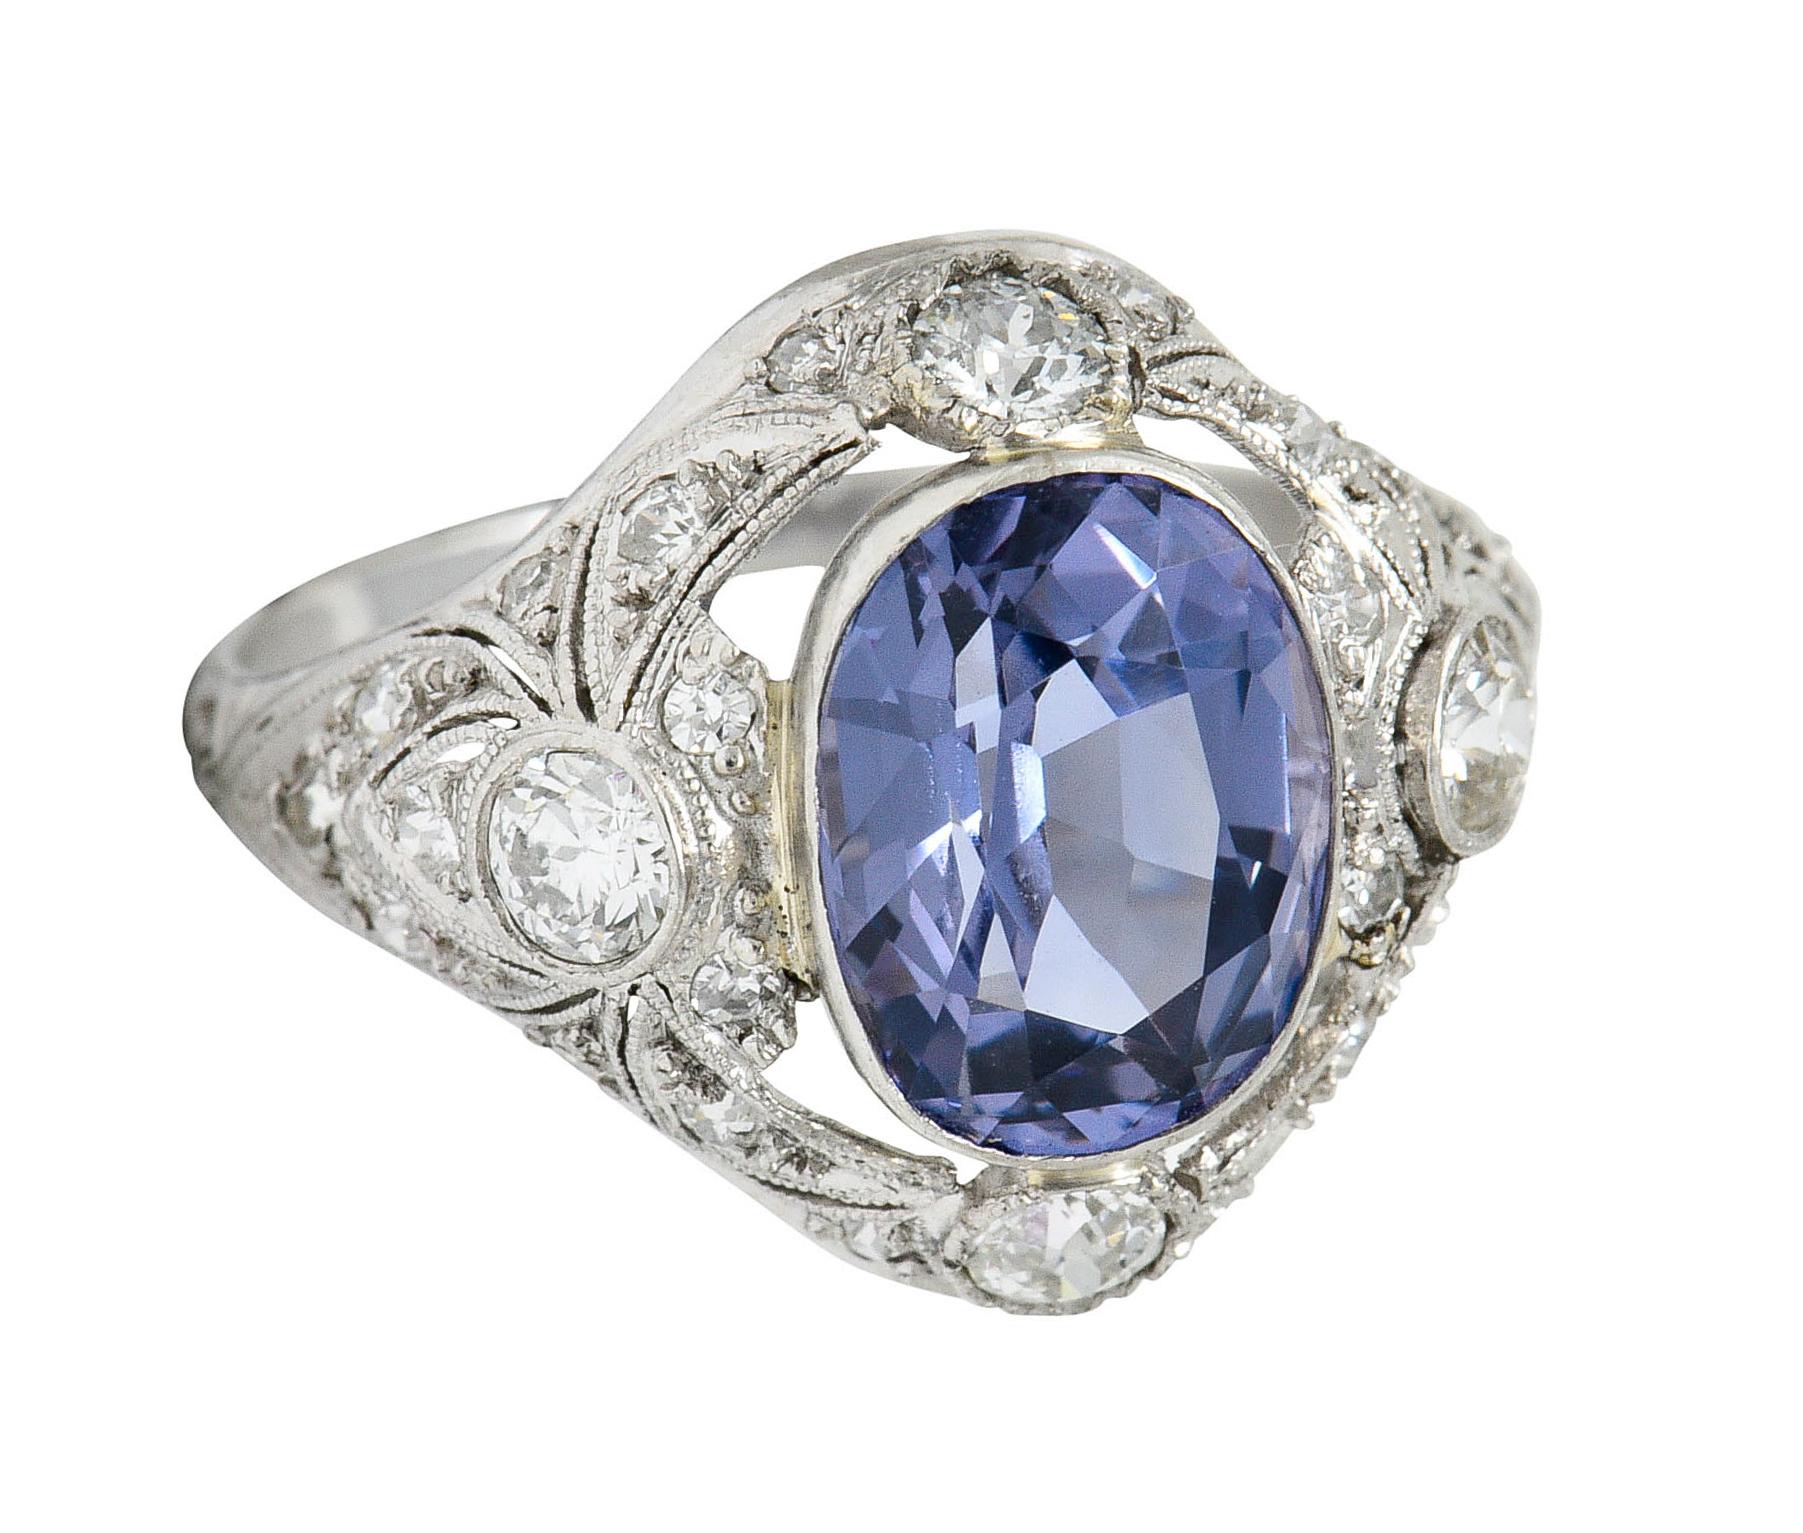 Edwardian 4.97 Carats No Heat Color-Changing Spinel Diamond Platinum Dinner Ring 11